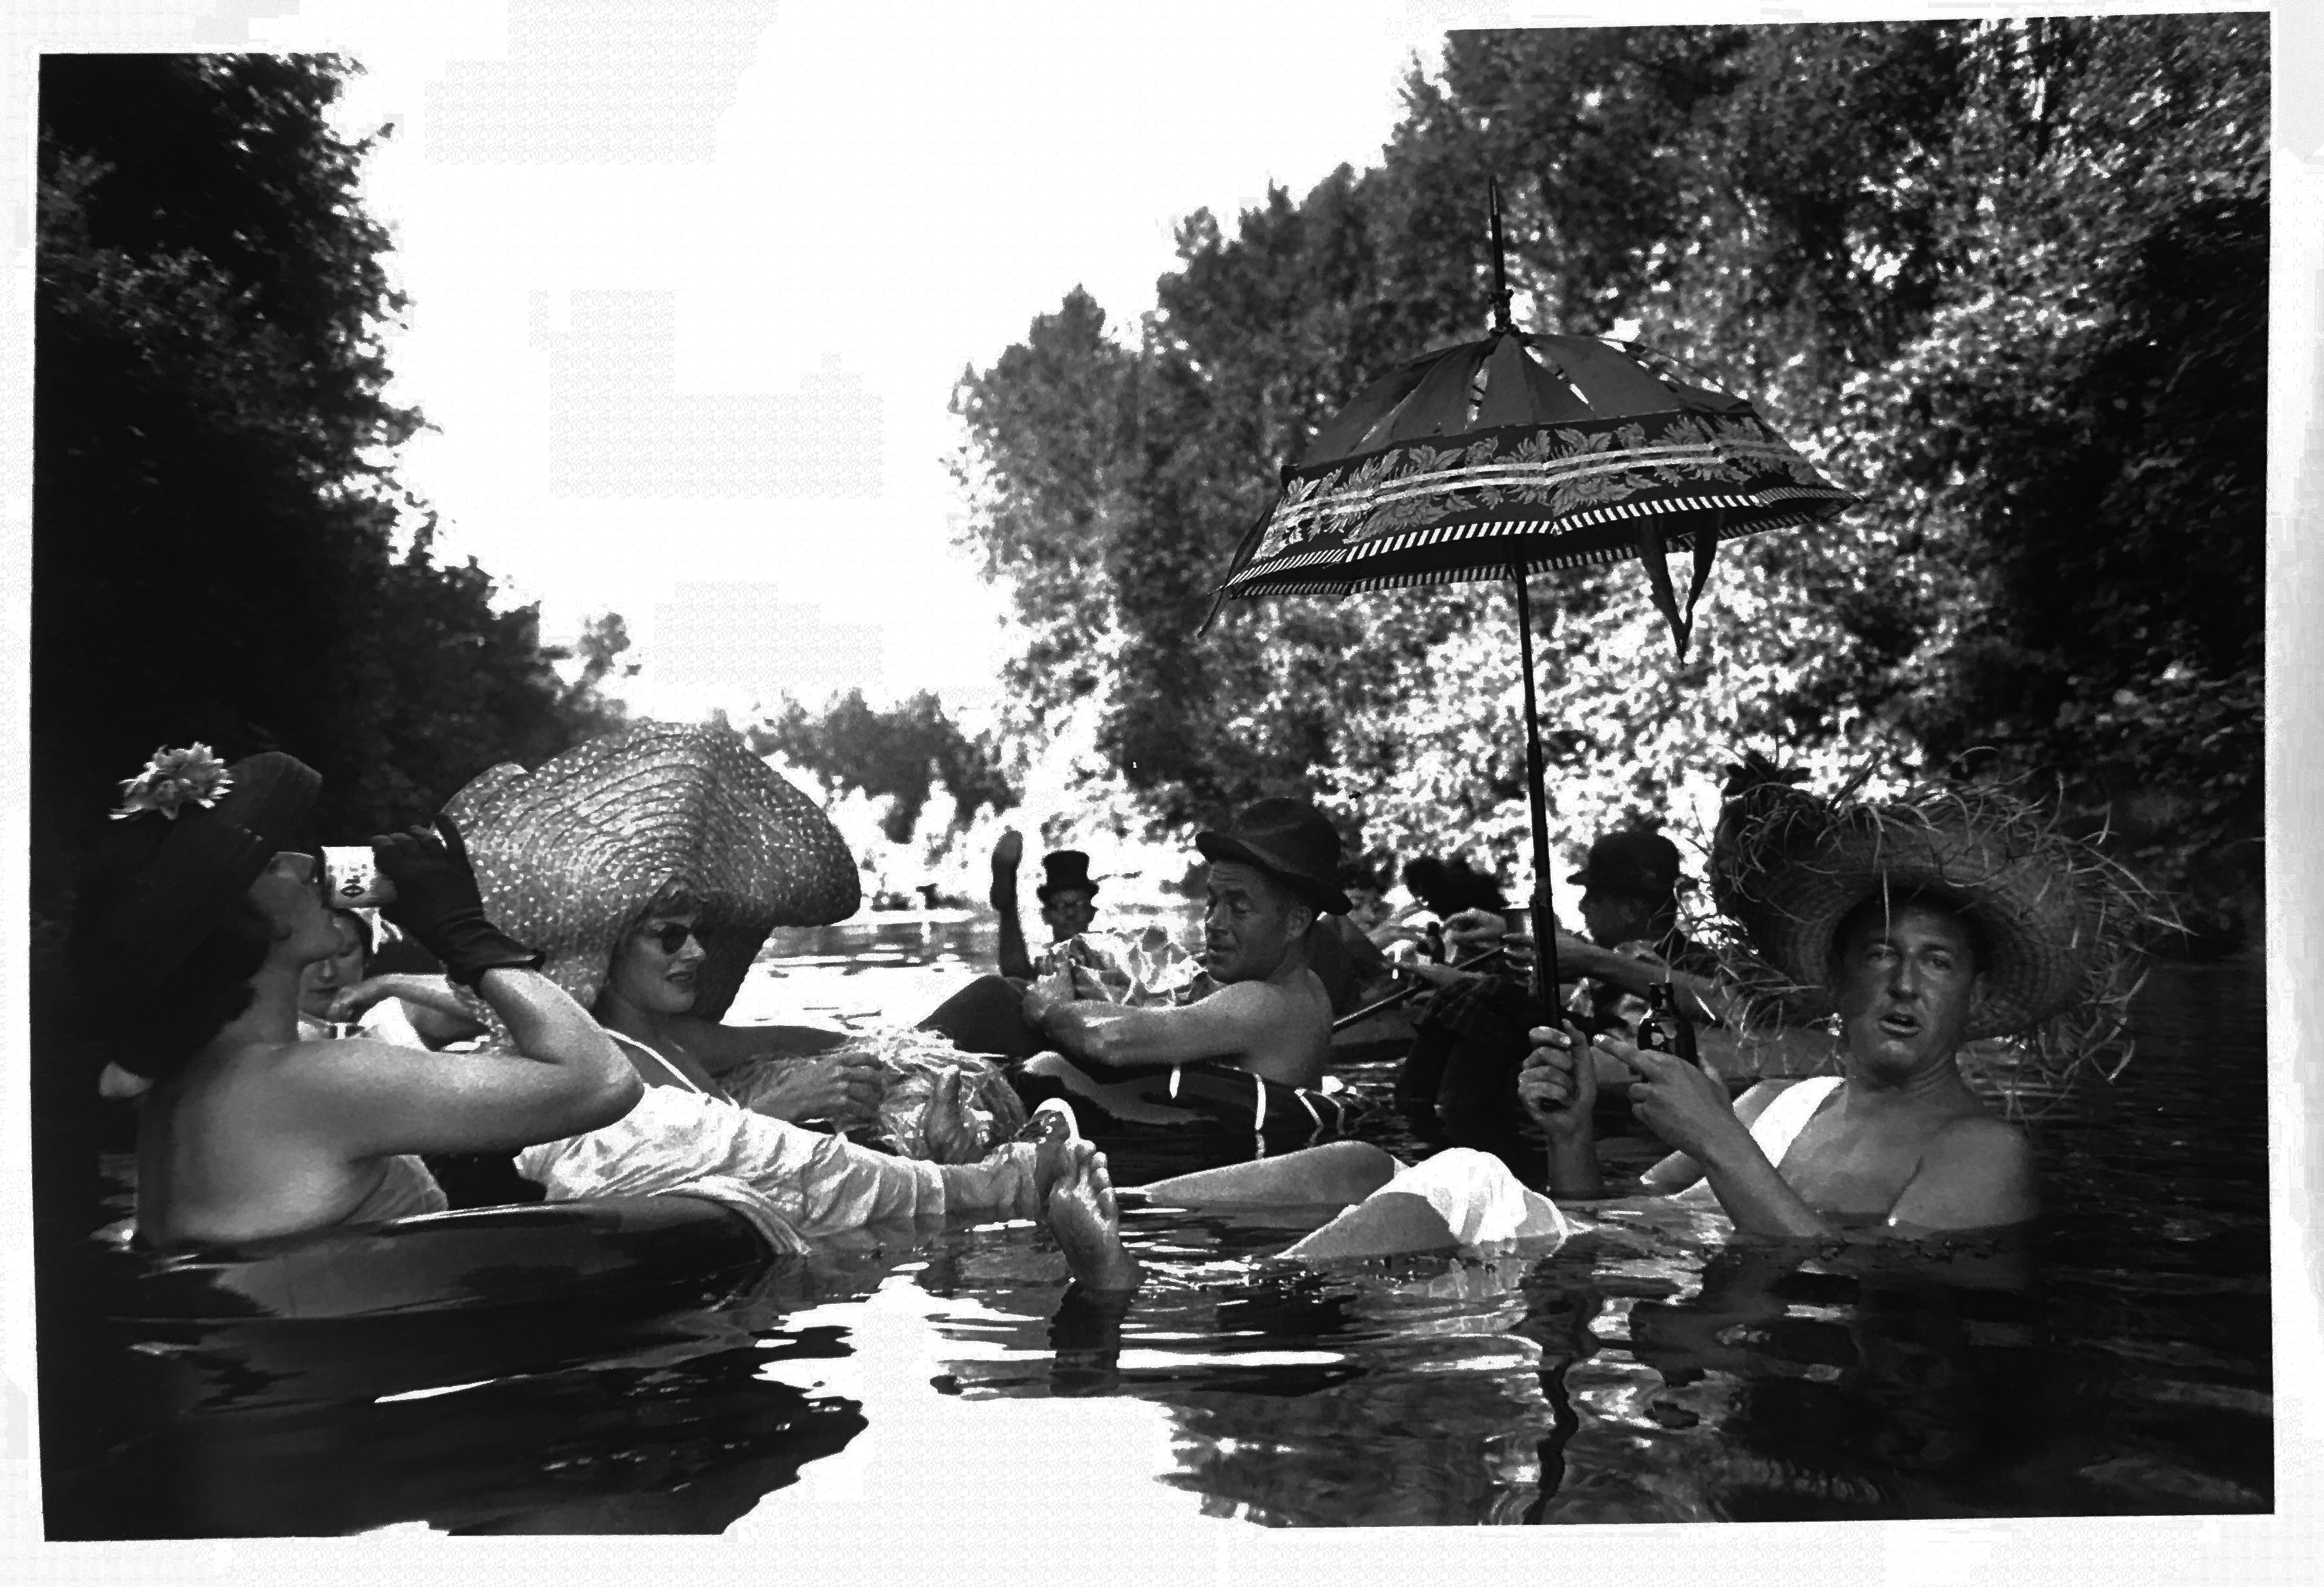 Seattle Tubing Society, Black and White Documentary Photography, Summer 